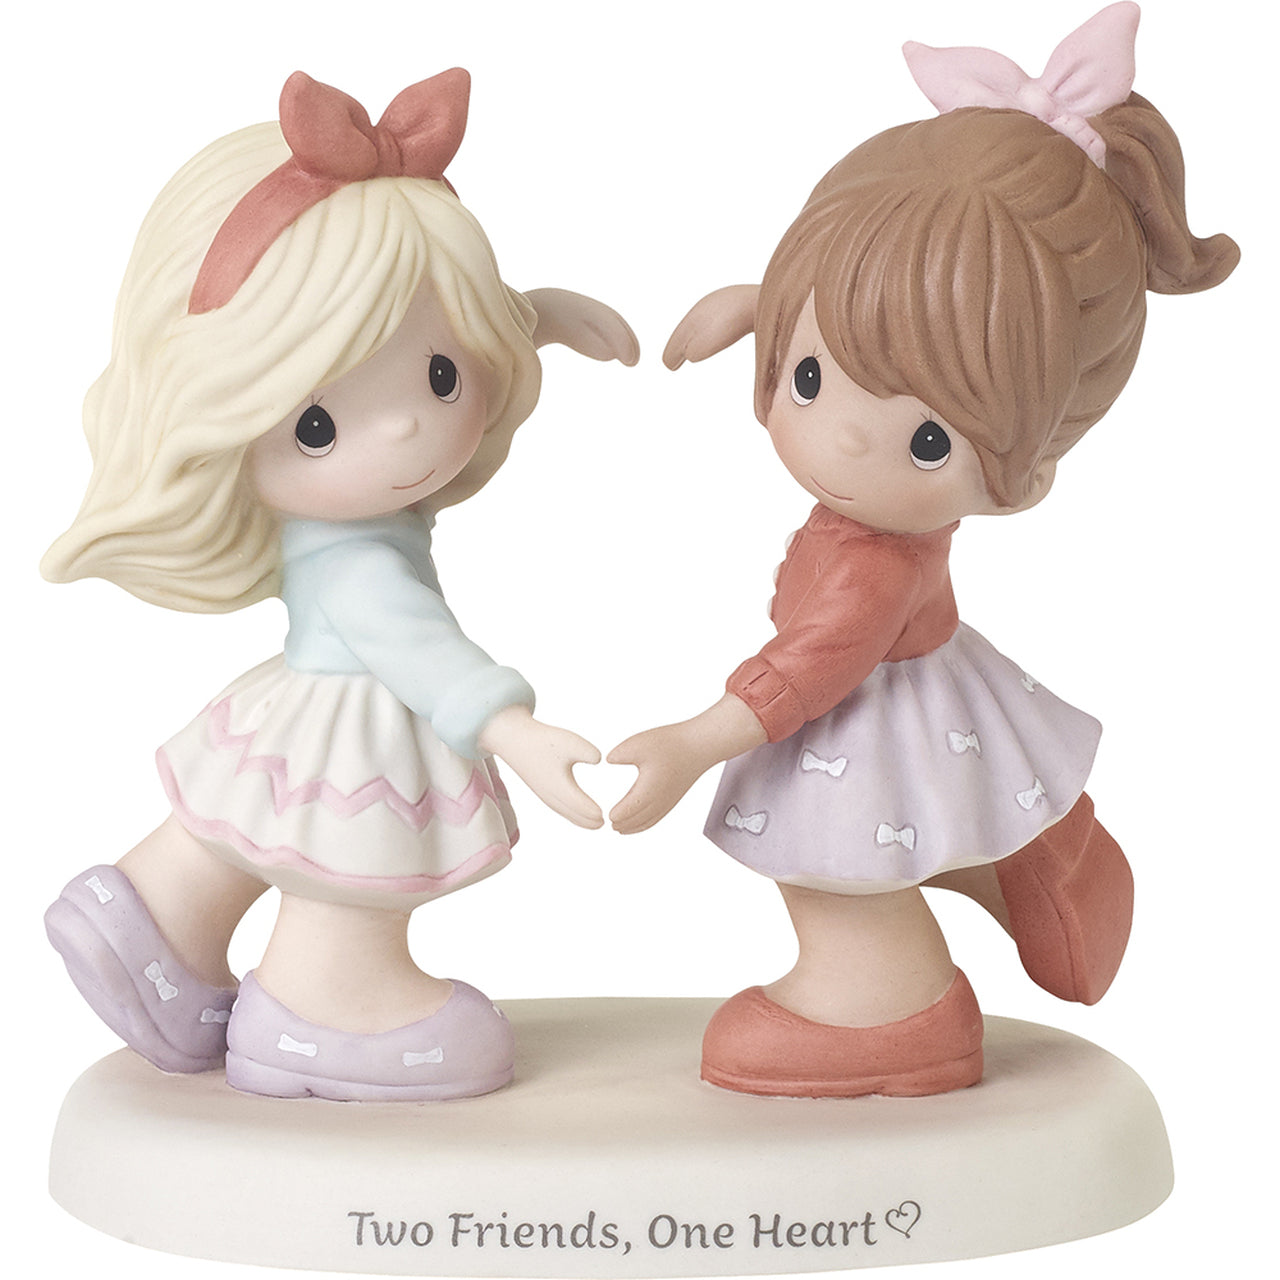 Precious Moments Two Friends One Heart Figurine Porcelain Bisque - Royal Gift